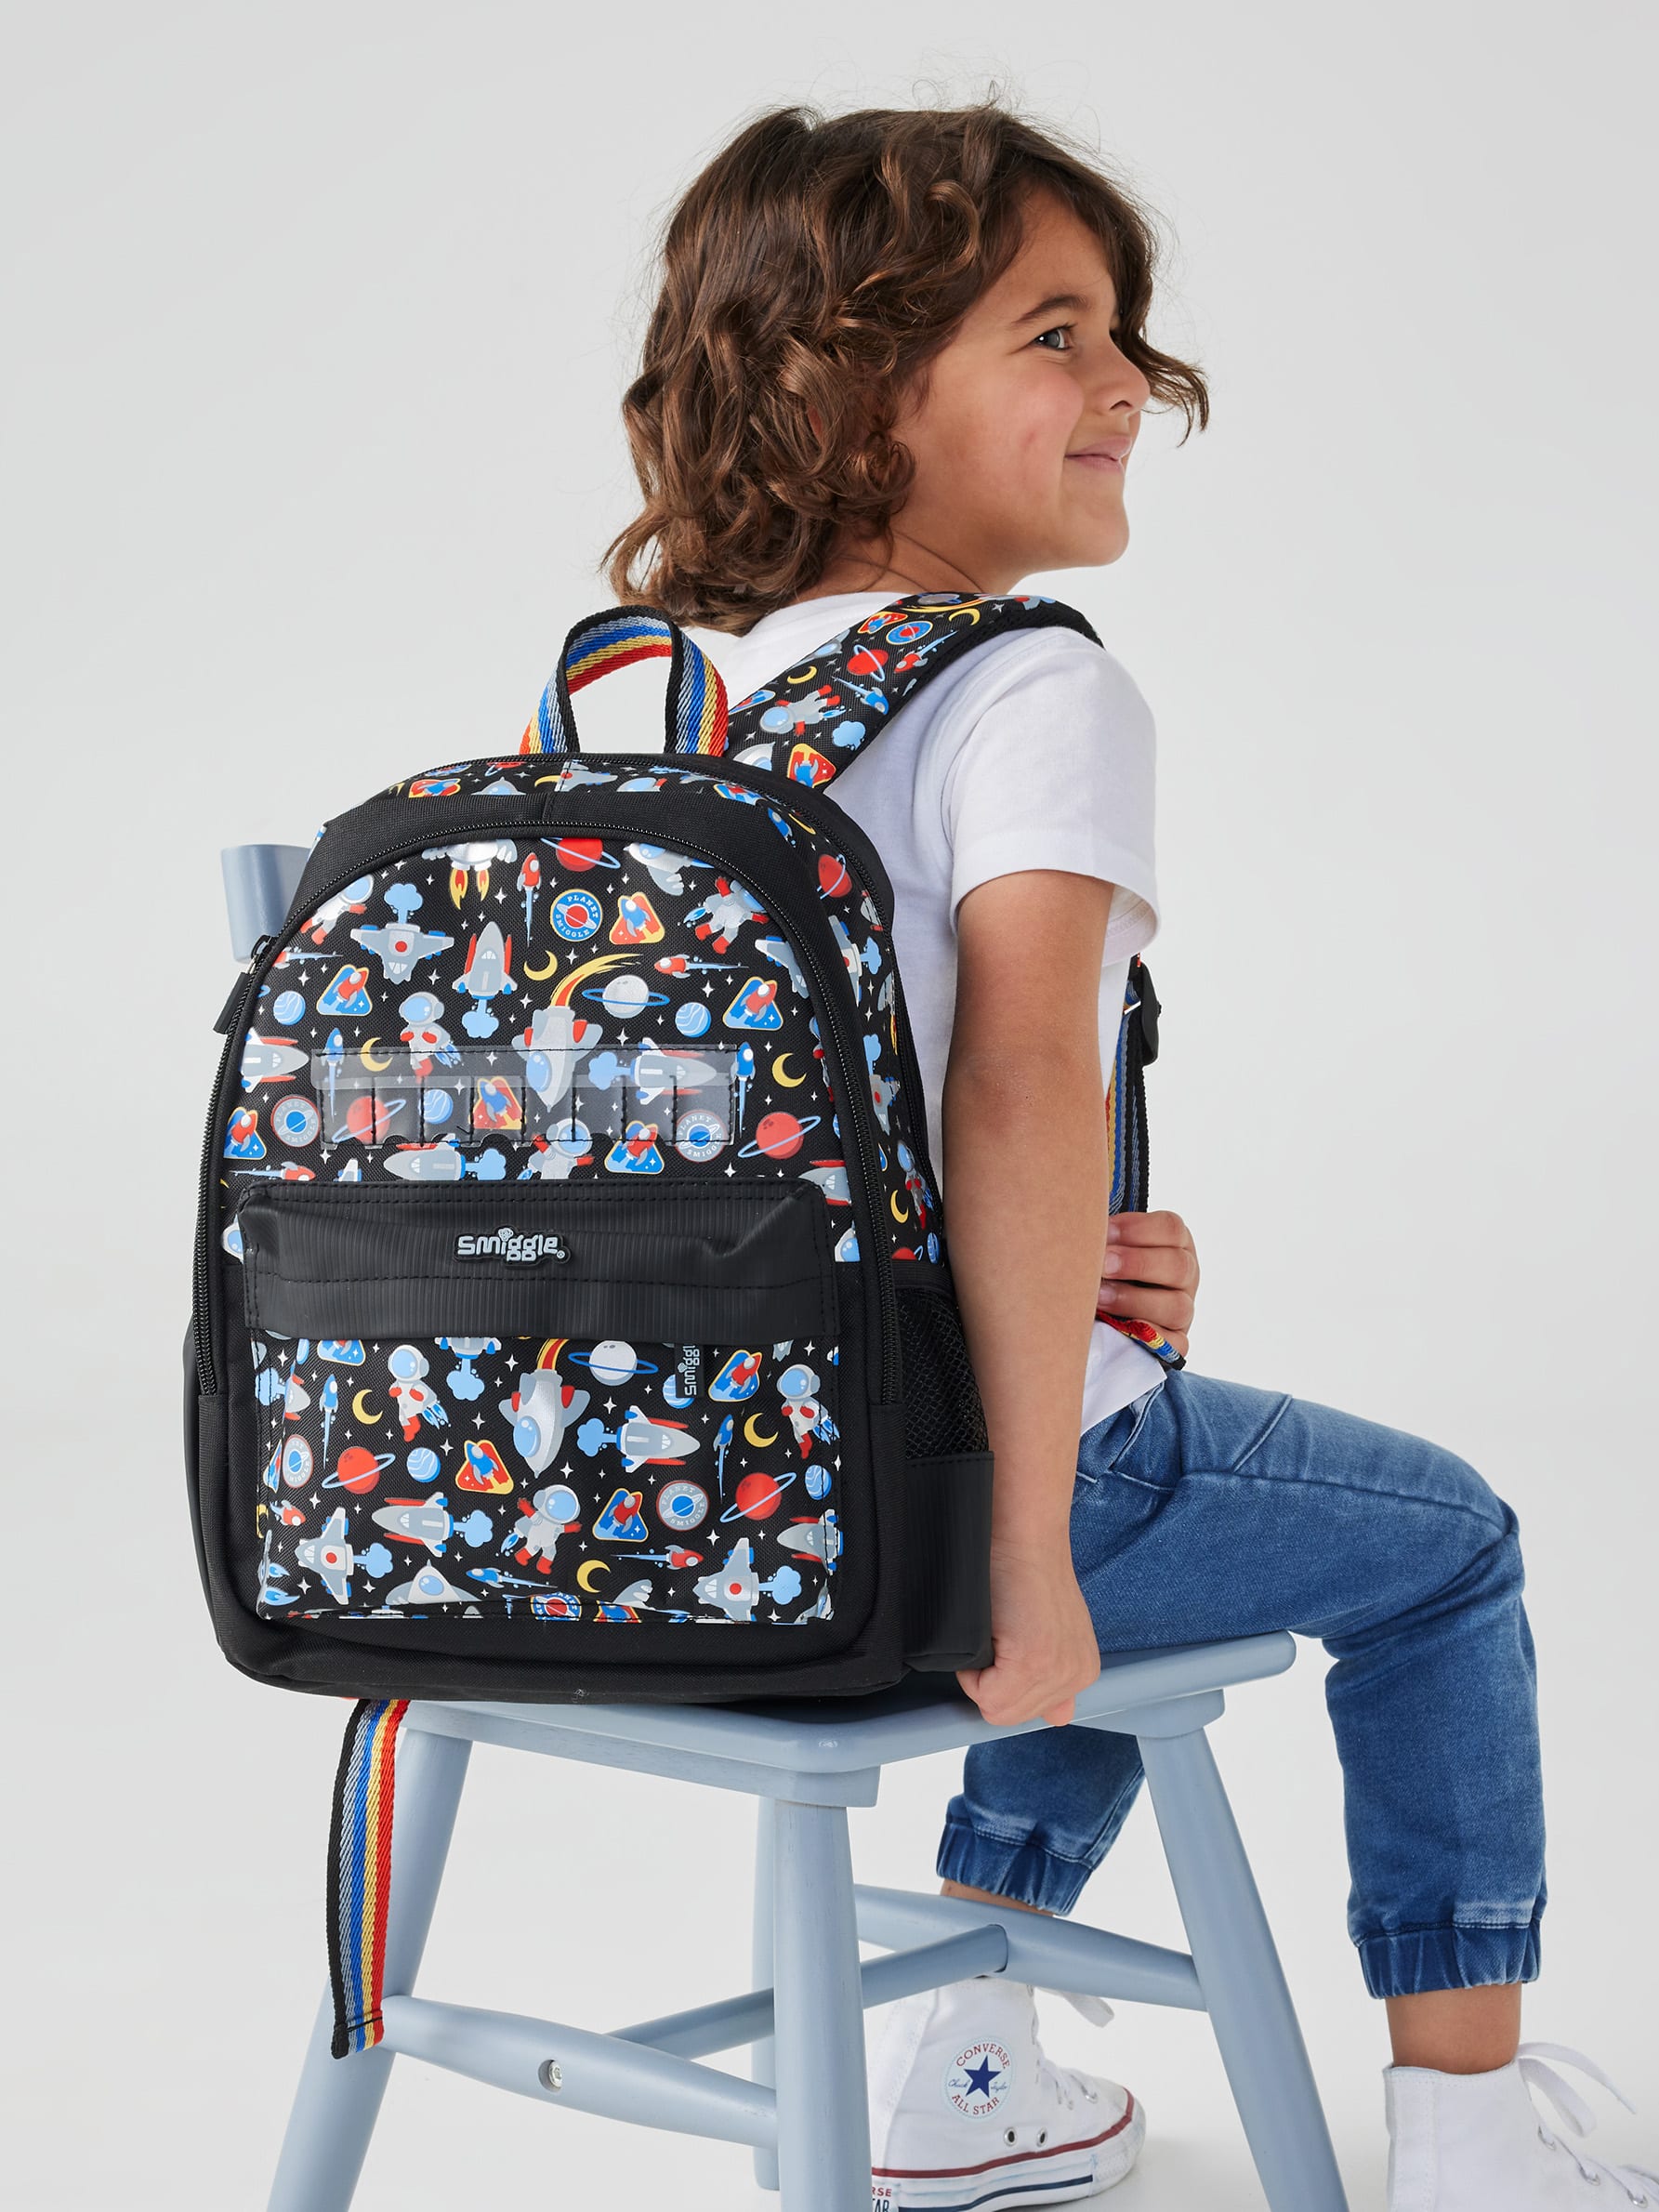 Back To School With Smiggle